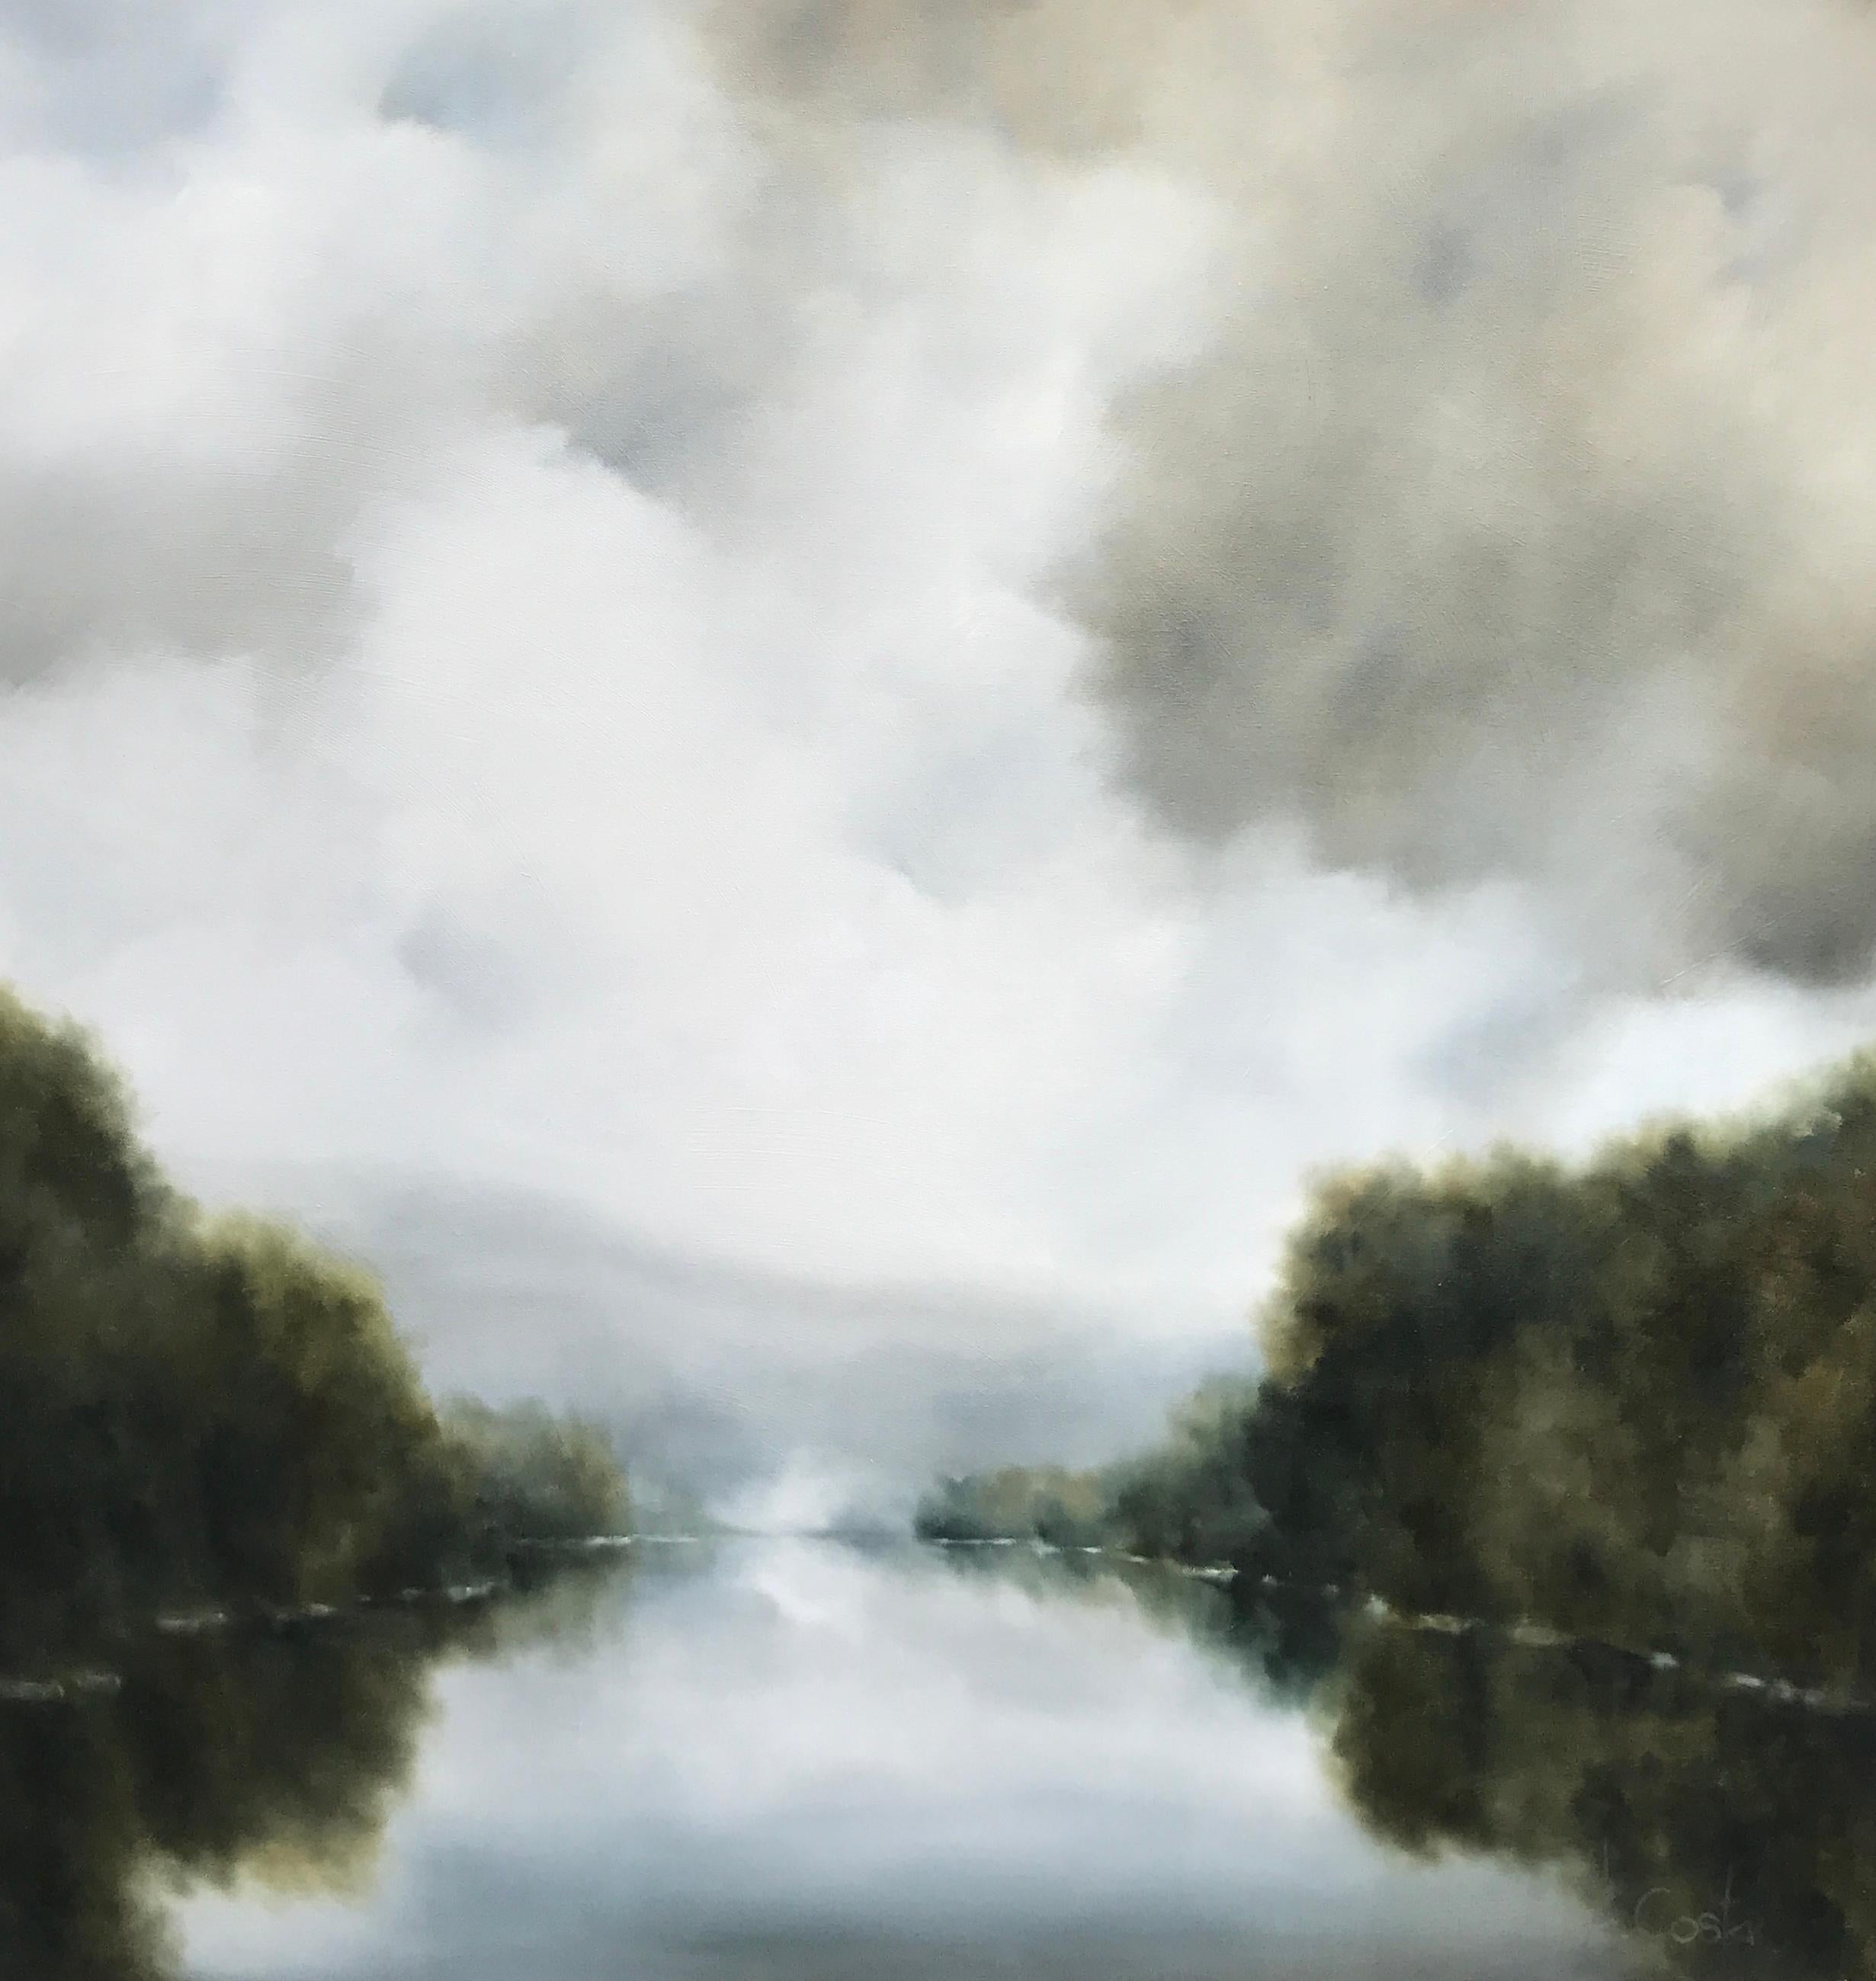 'Morning Greetings' is a large Impressionist oil on gessoed canvas landscape painting created by American artist Andrea Costa in 2018. Featuring a soft palette mostly made of grey, white, blue and green tones, the painting depicts a peaceful yet